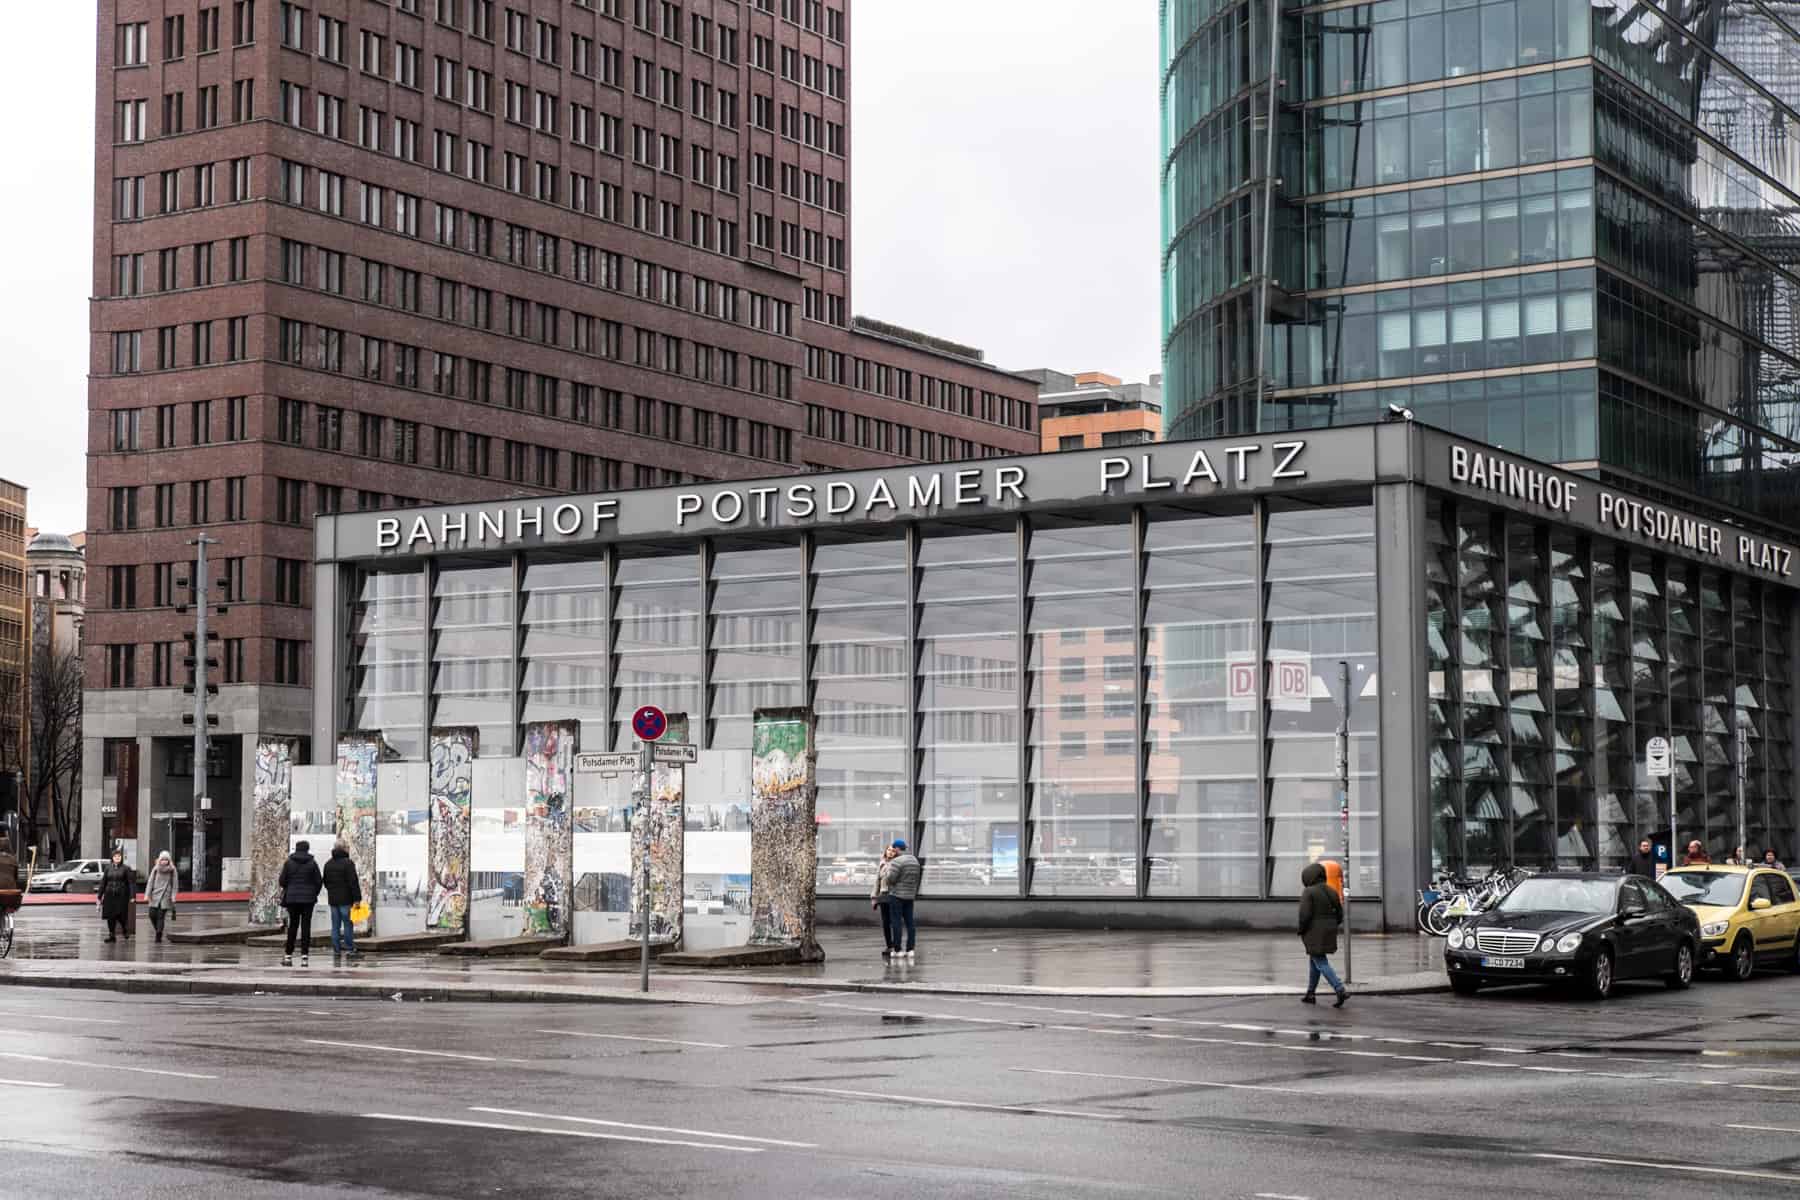 Six sections of the Berlin Wall stand outside the glass box rail station of Potsdamer Platz in front of high rise buildings